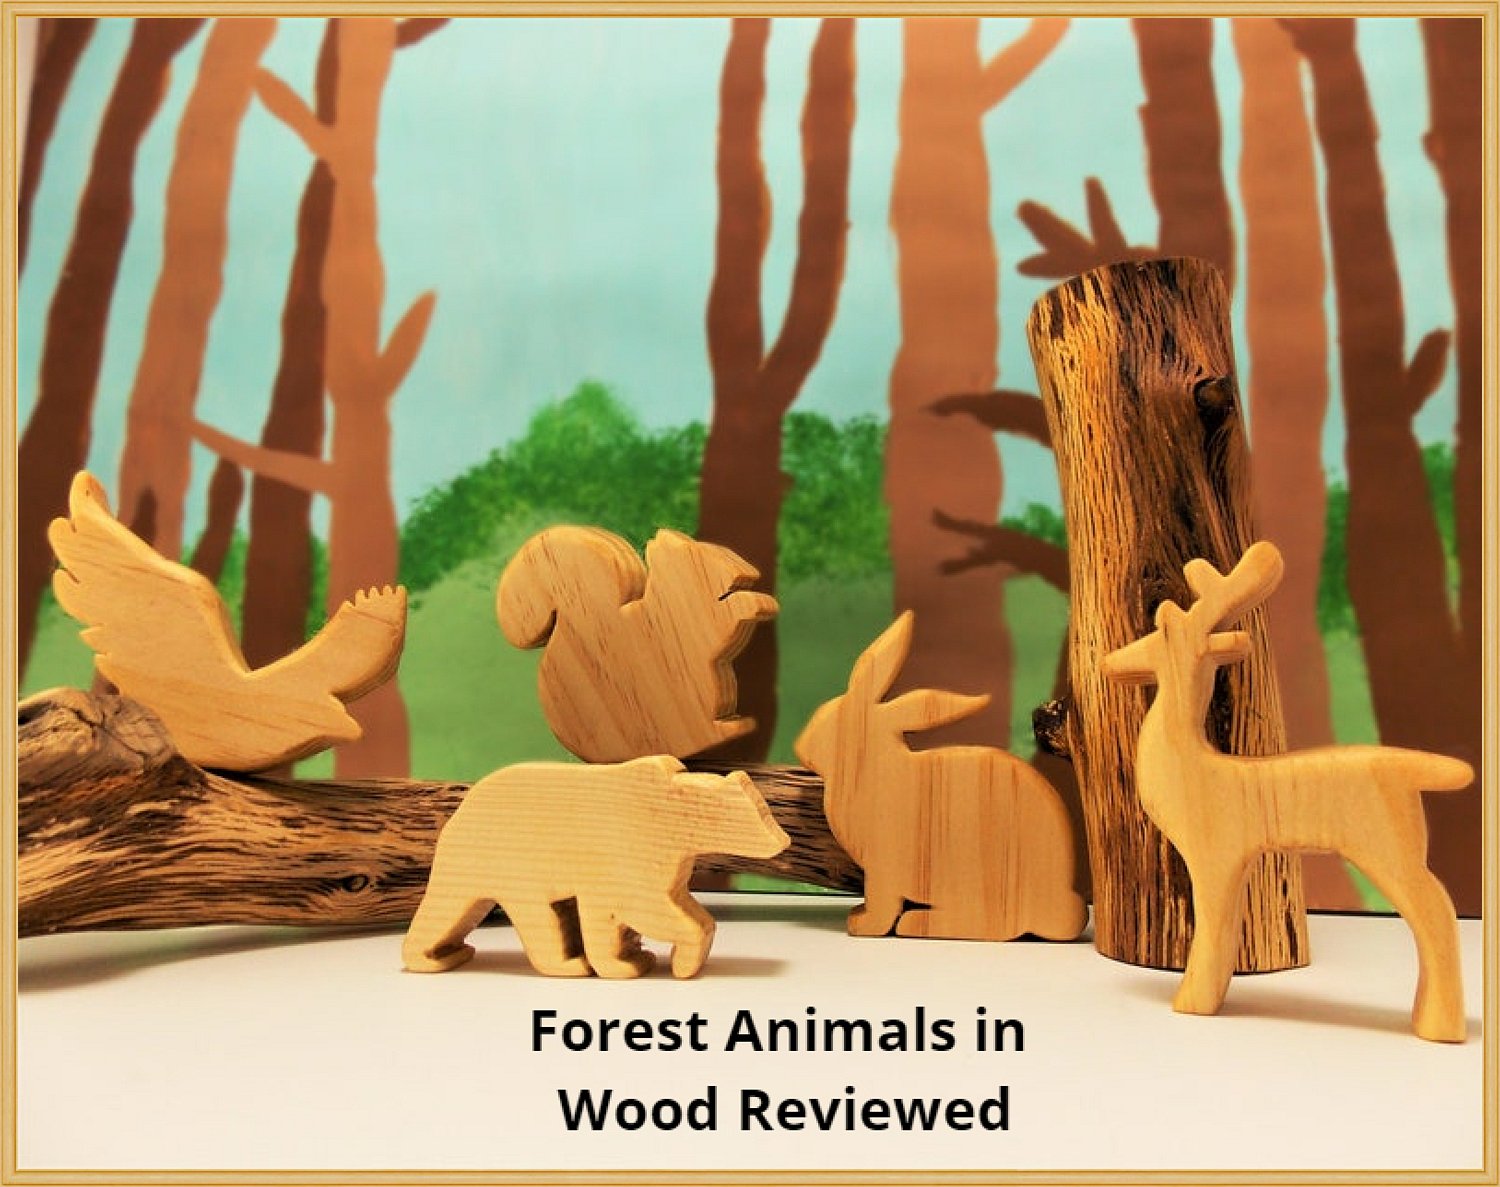 Vi.yo Hand Carved Wooden Cute Mini Wooden Pegs Carving Craft Ornaments Home Animal figurine Wooden Present For Children Adults or Animal Lovers